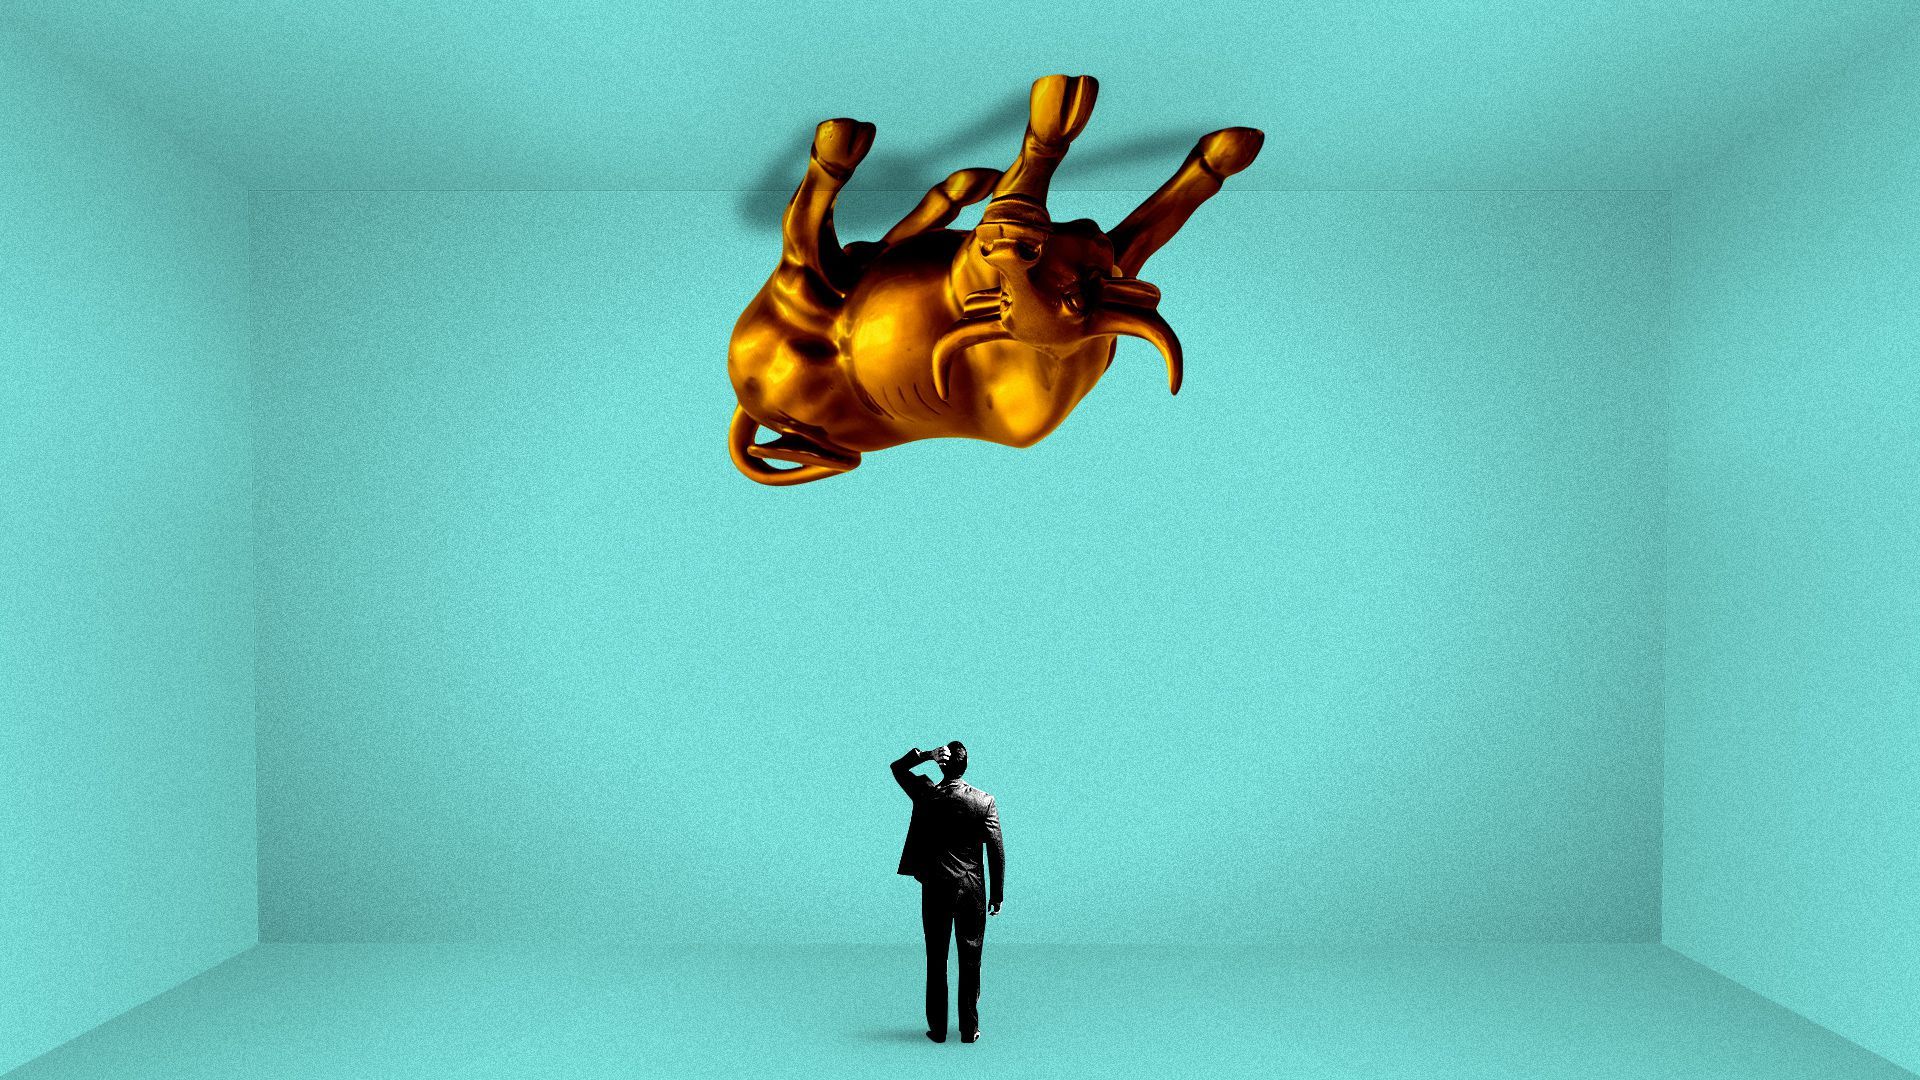 Illustration of the Wall Street bull on the ceiling with a confused man looking up.